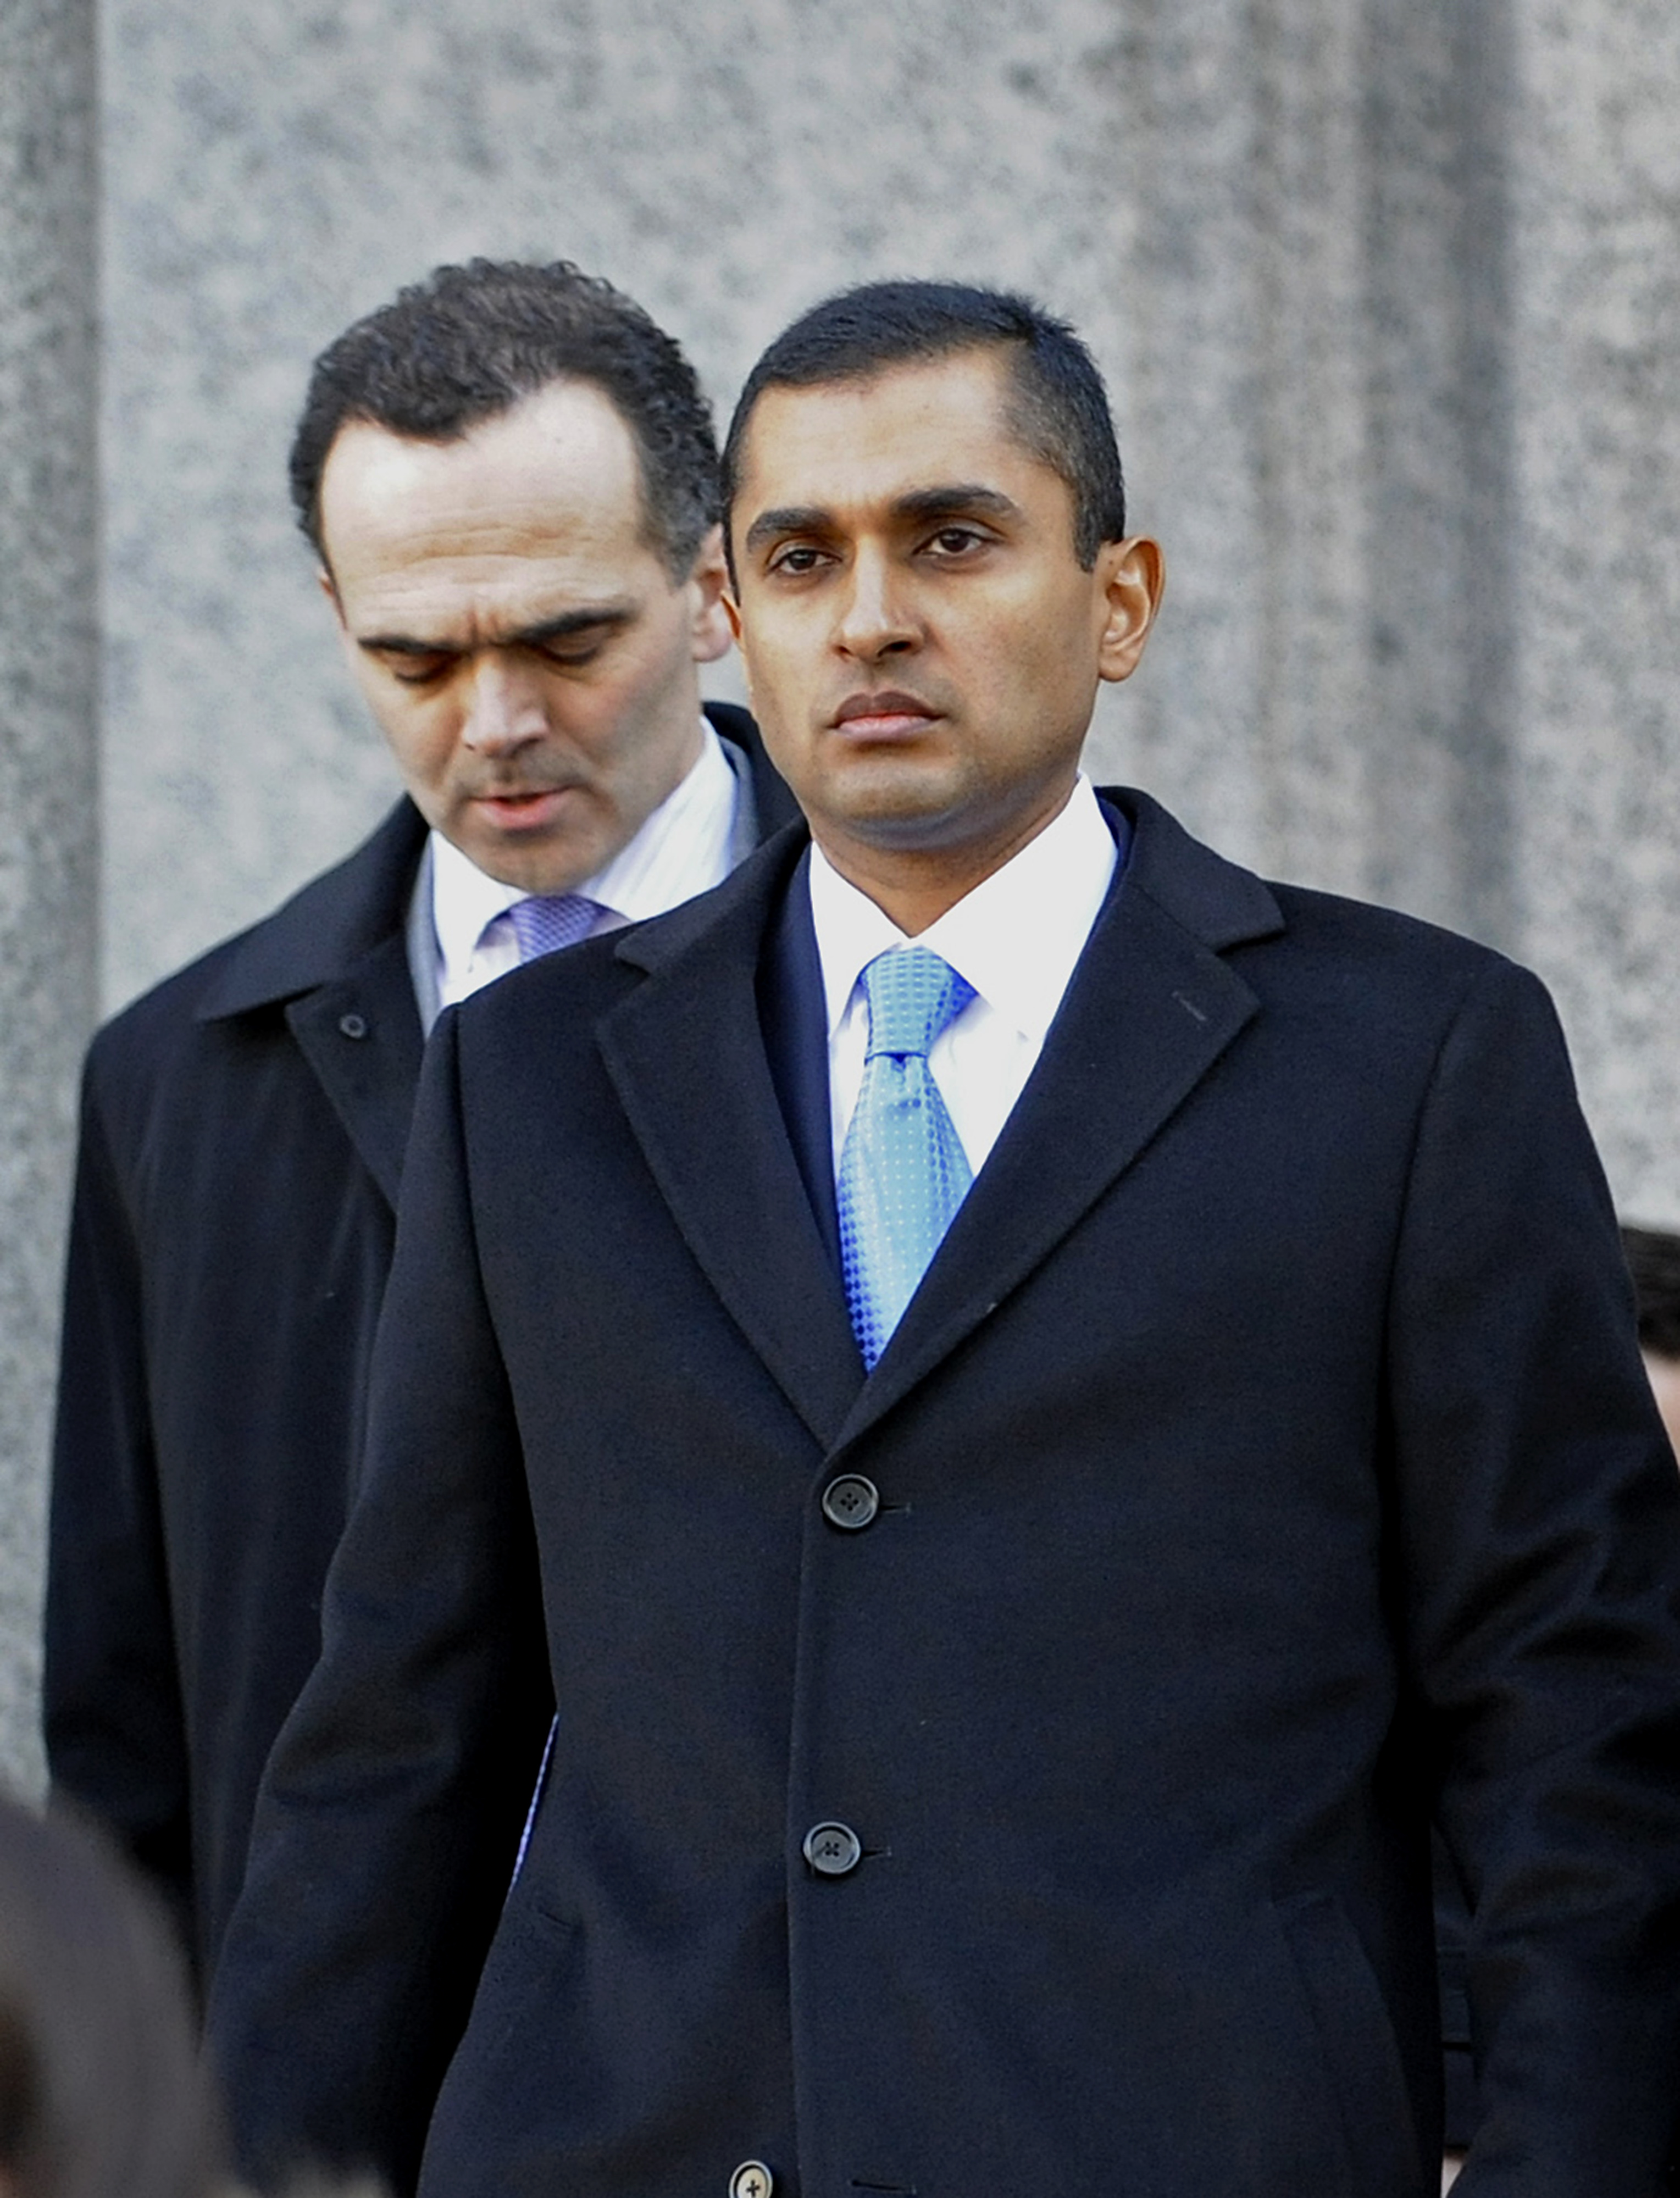 Former SAC Capital Advisors LP Portfolio Manager Mathew Martoma Found Guilty On Insider Trading Charges